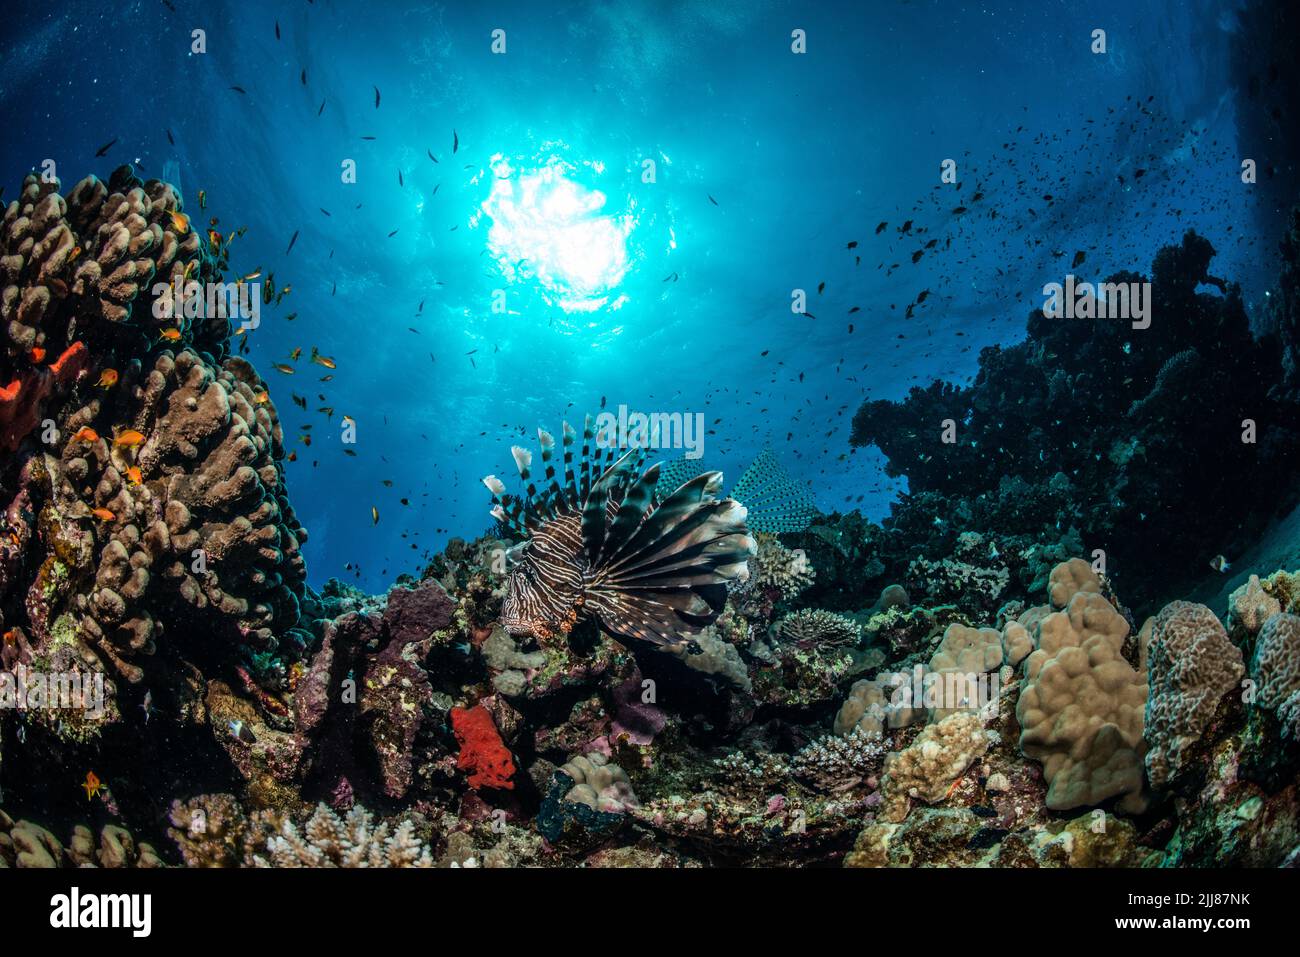 Coral reef scenery Stock Photo